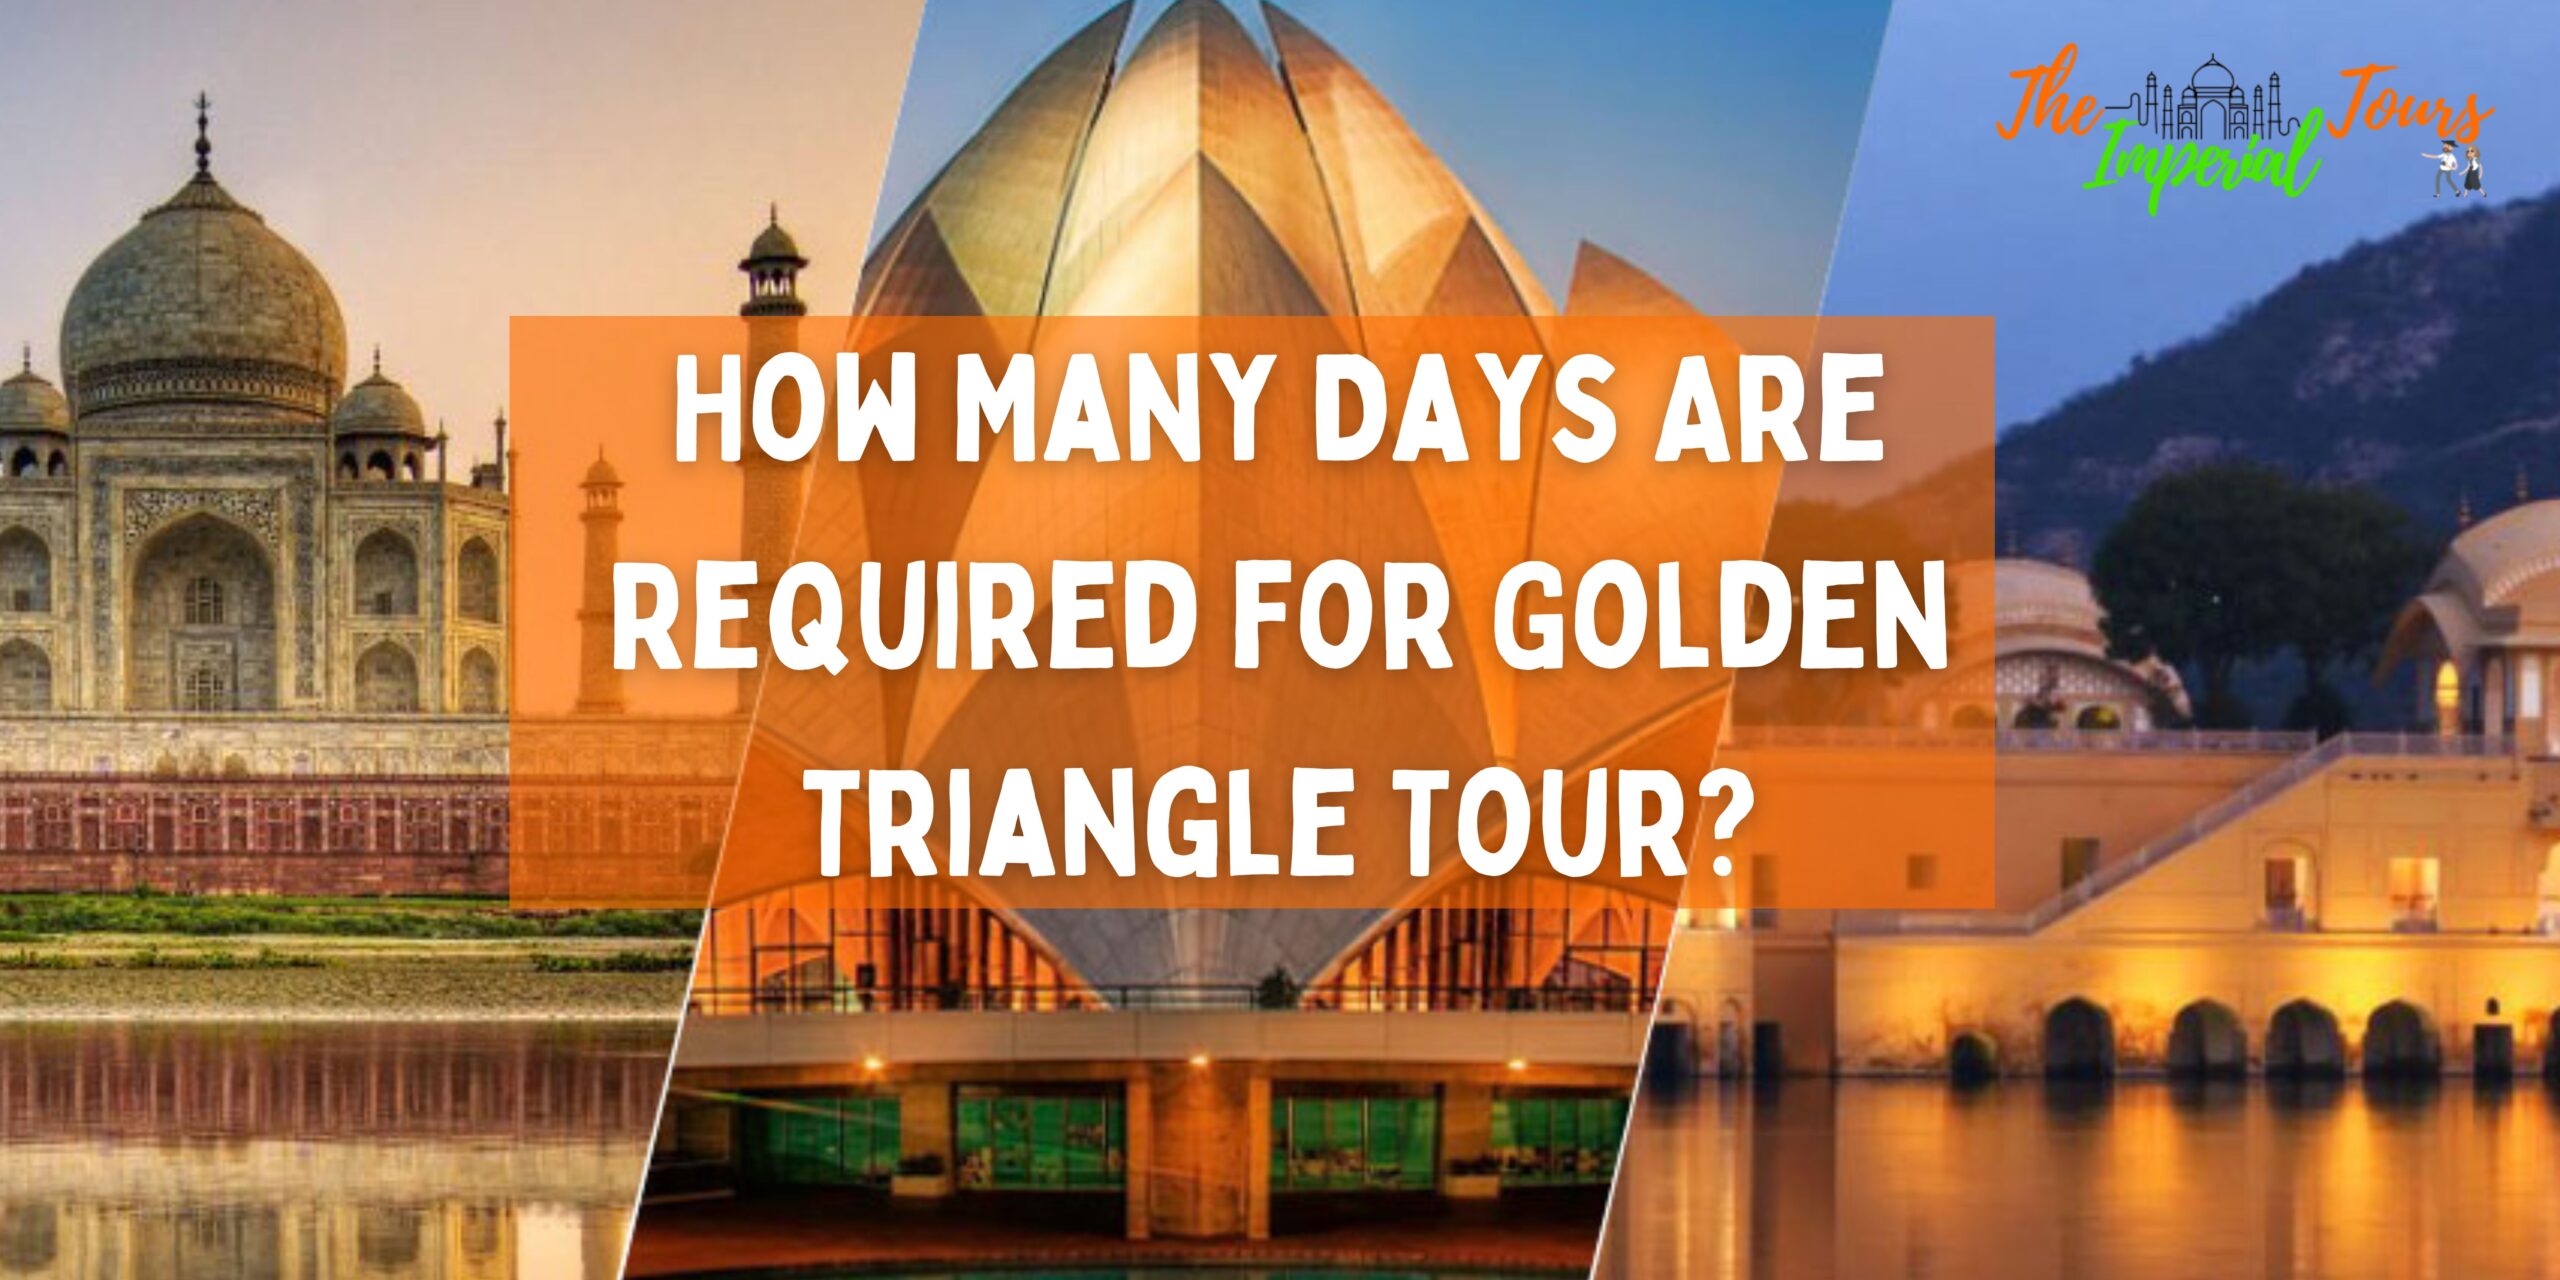 You are currently viewing How Many Days Are Required for Golden Triangle Tour?